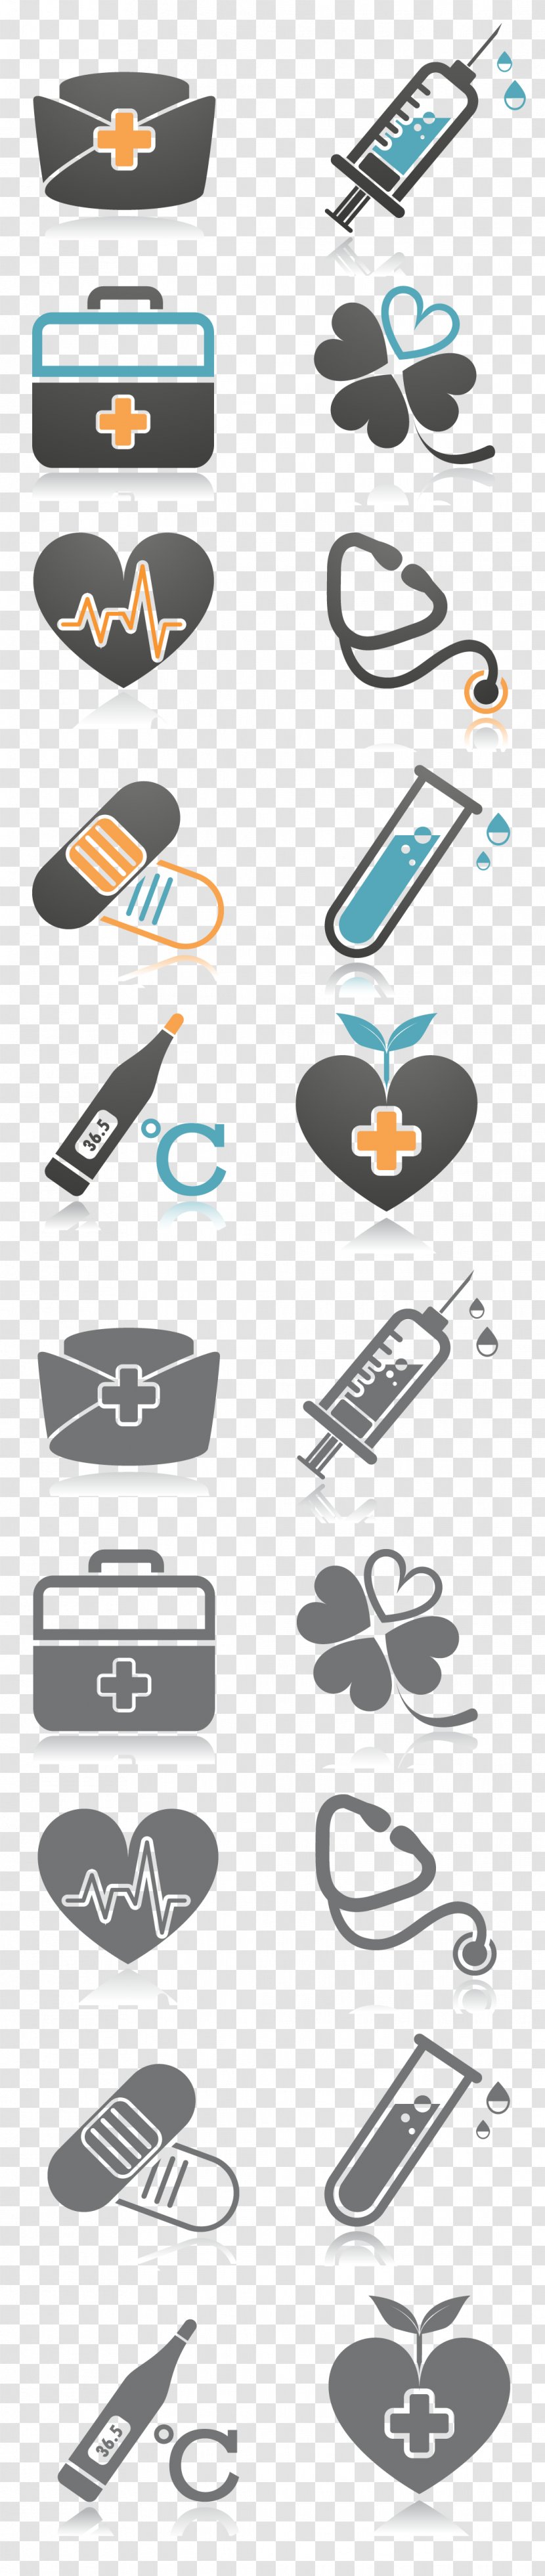 Icon Design Health Care User Interface - Flat - Medical Icons Transparent PNG